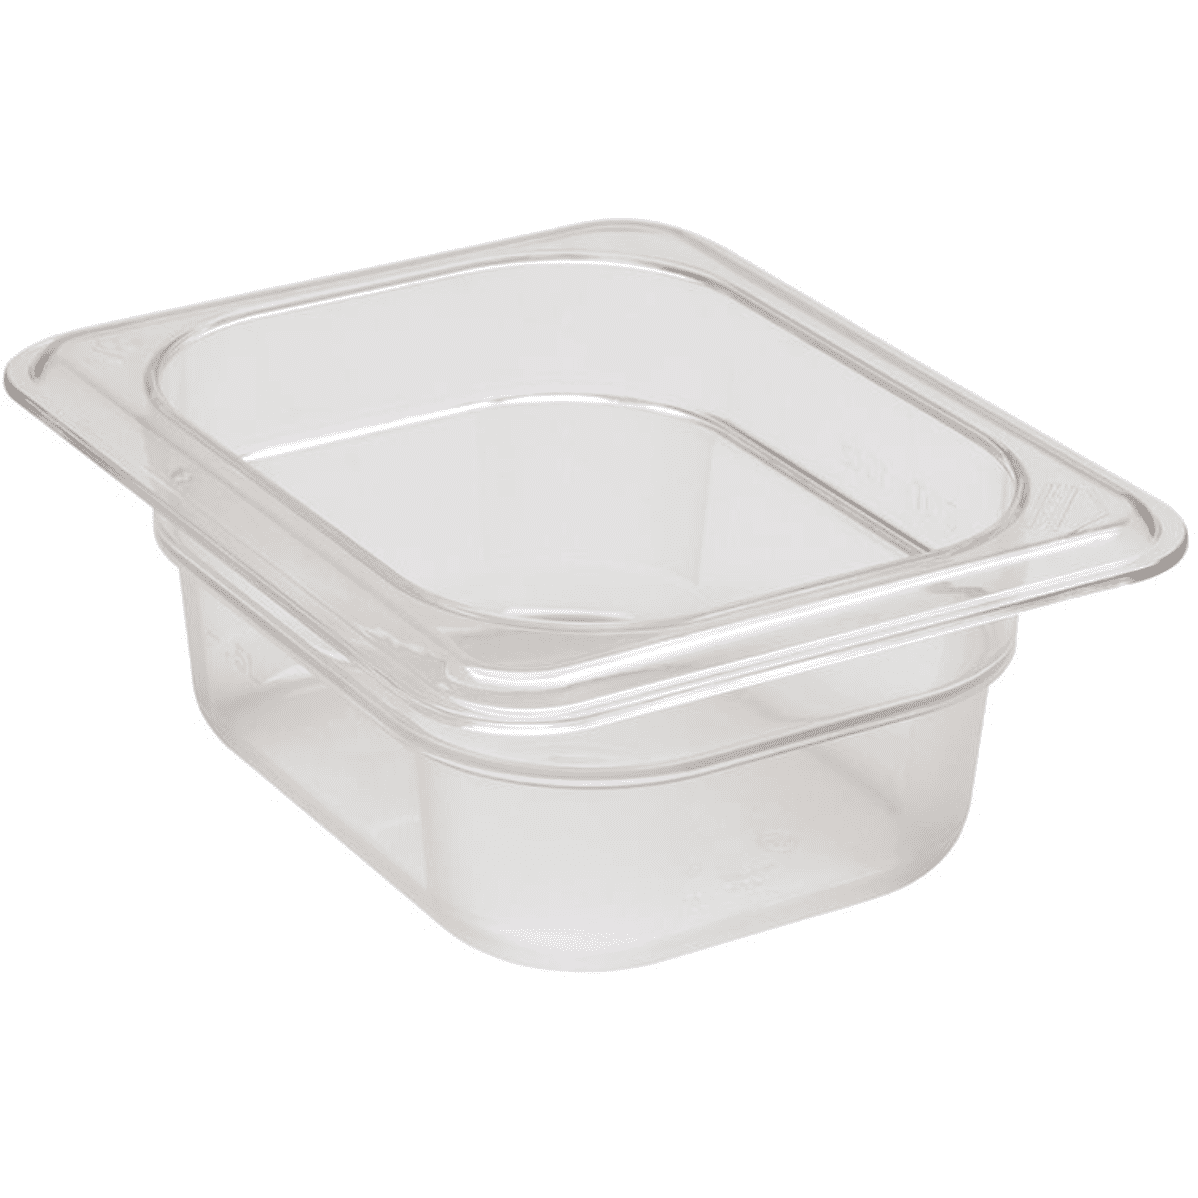 Cambro 65mm Deep 1/8GN Clear Polycarbonate Gastronorm Pan